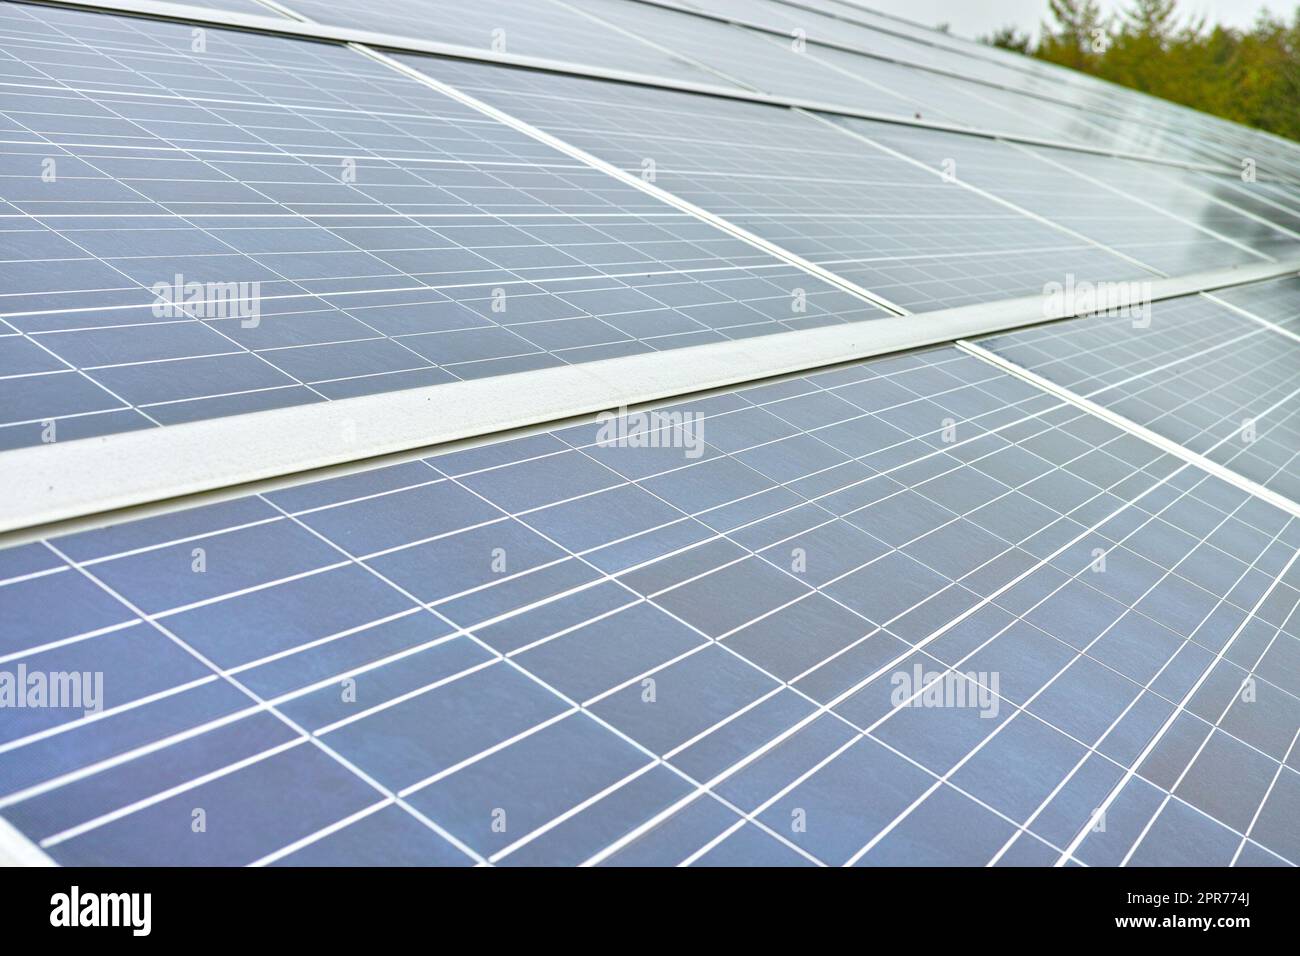 Solar power installation cell panels are a renewable sustainable energy source. Blue solar panels in Denmark. Photovoltaic generating electricity in electric stations, alternative energy from nature Stock Photo